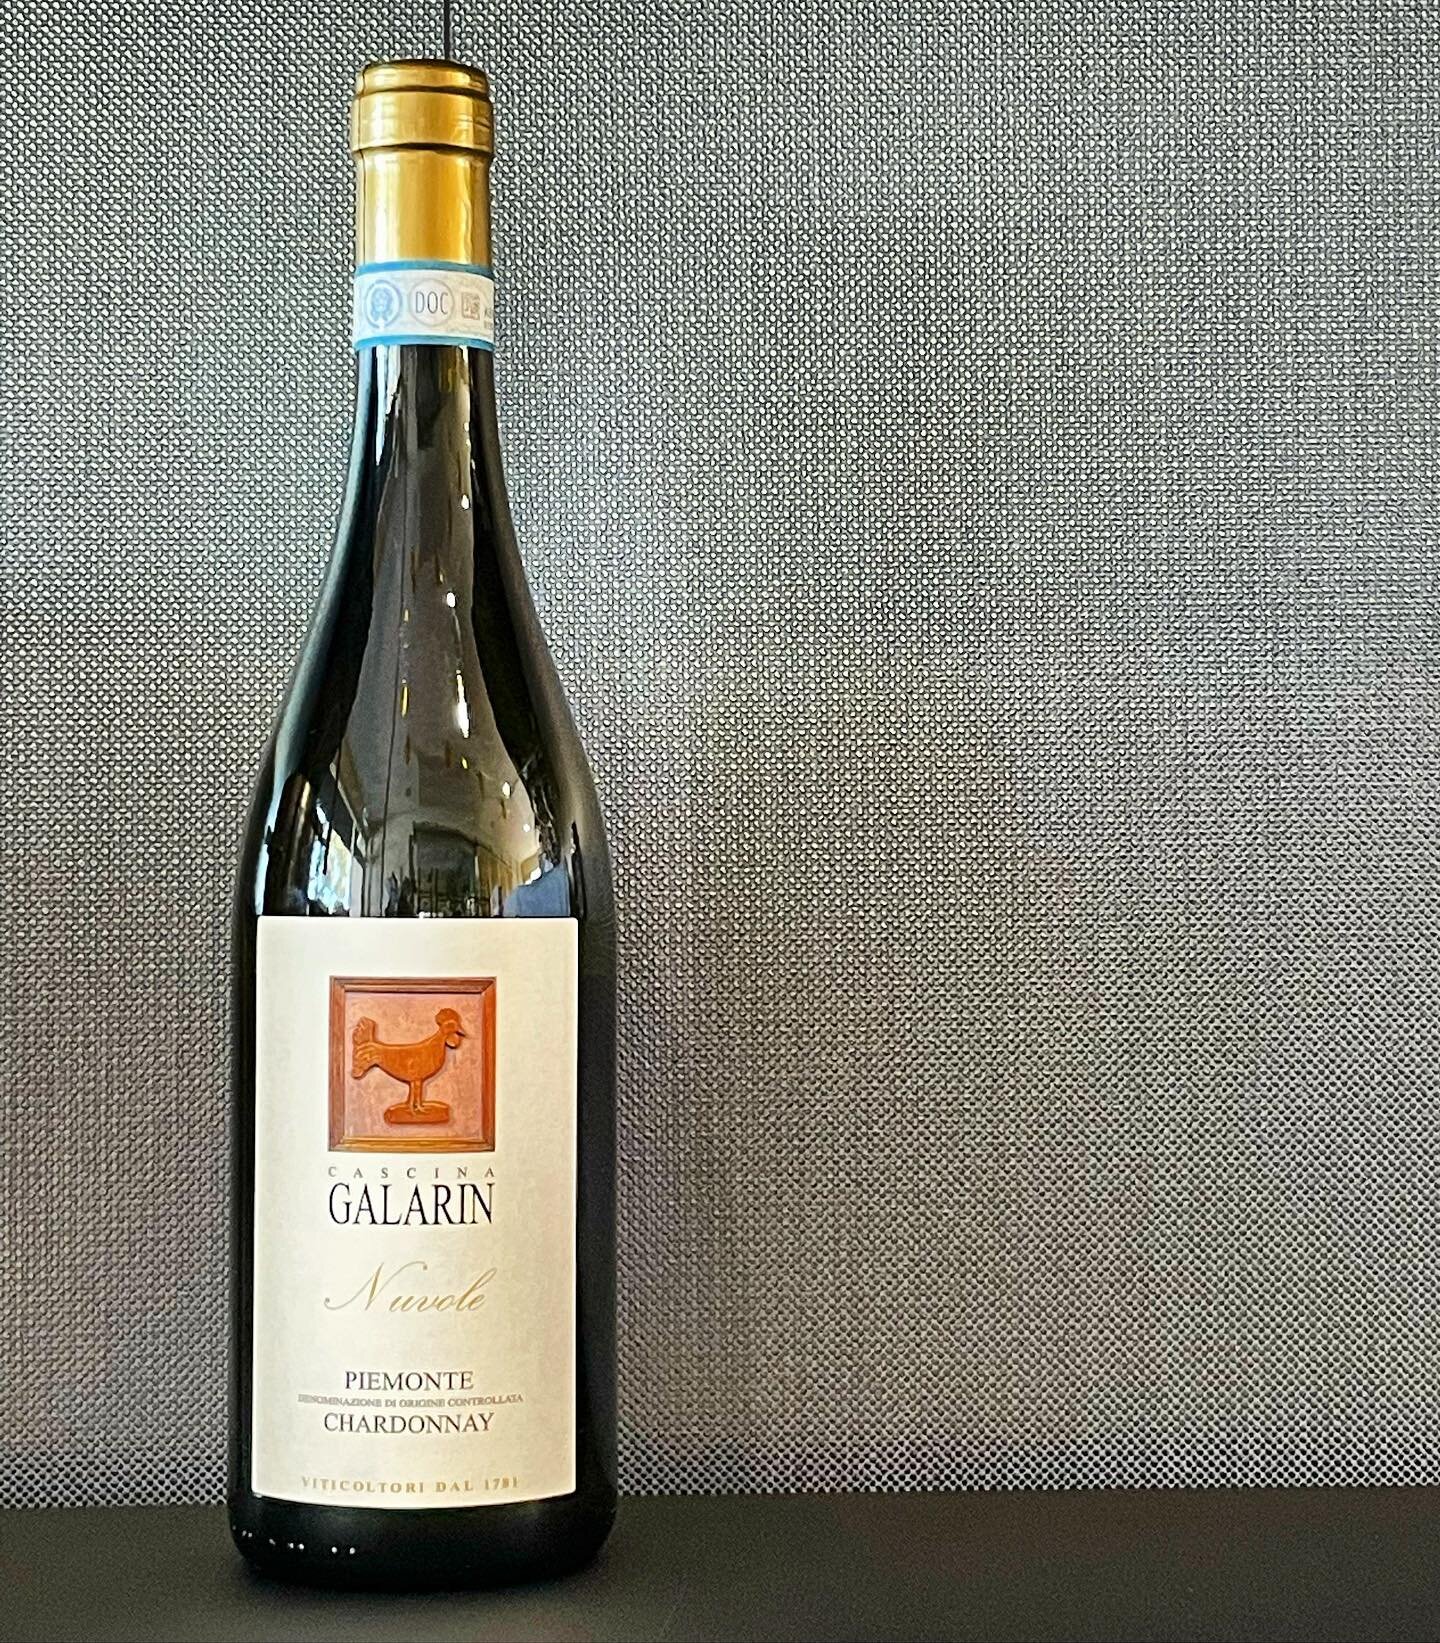 2019 Cascina Galarin Chardonnay, 
Piemonte D.O.C Italy. 

370m above sea level 

The Galarin family has been making wine since 1781, and they still work the certified organic vineyard every day to keep their tradition alive. 

The nose has distinct m